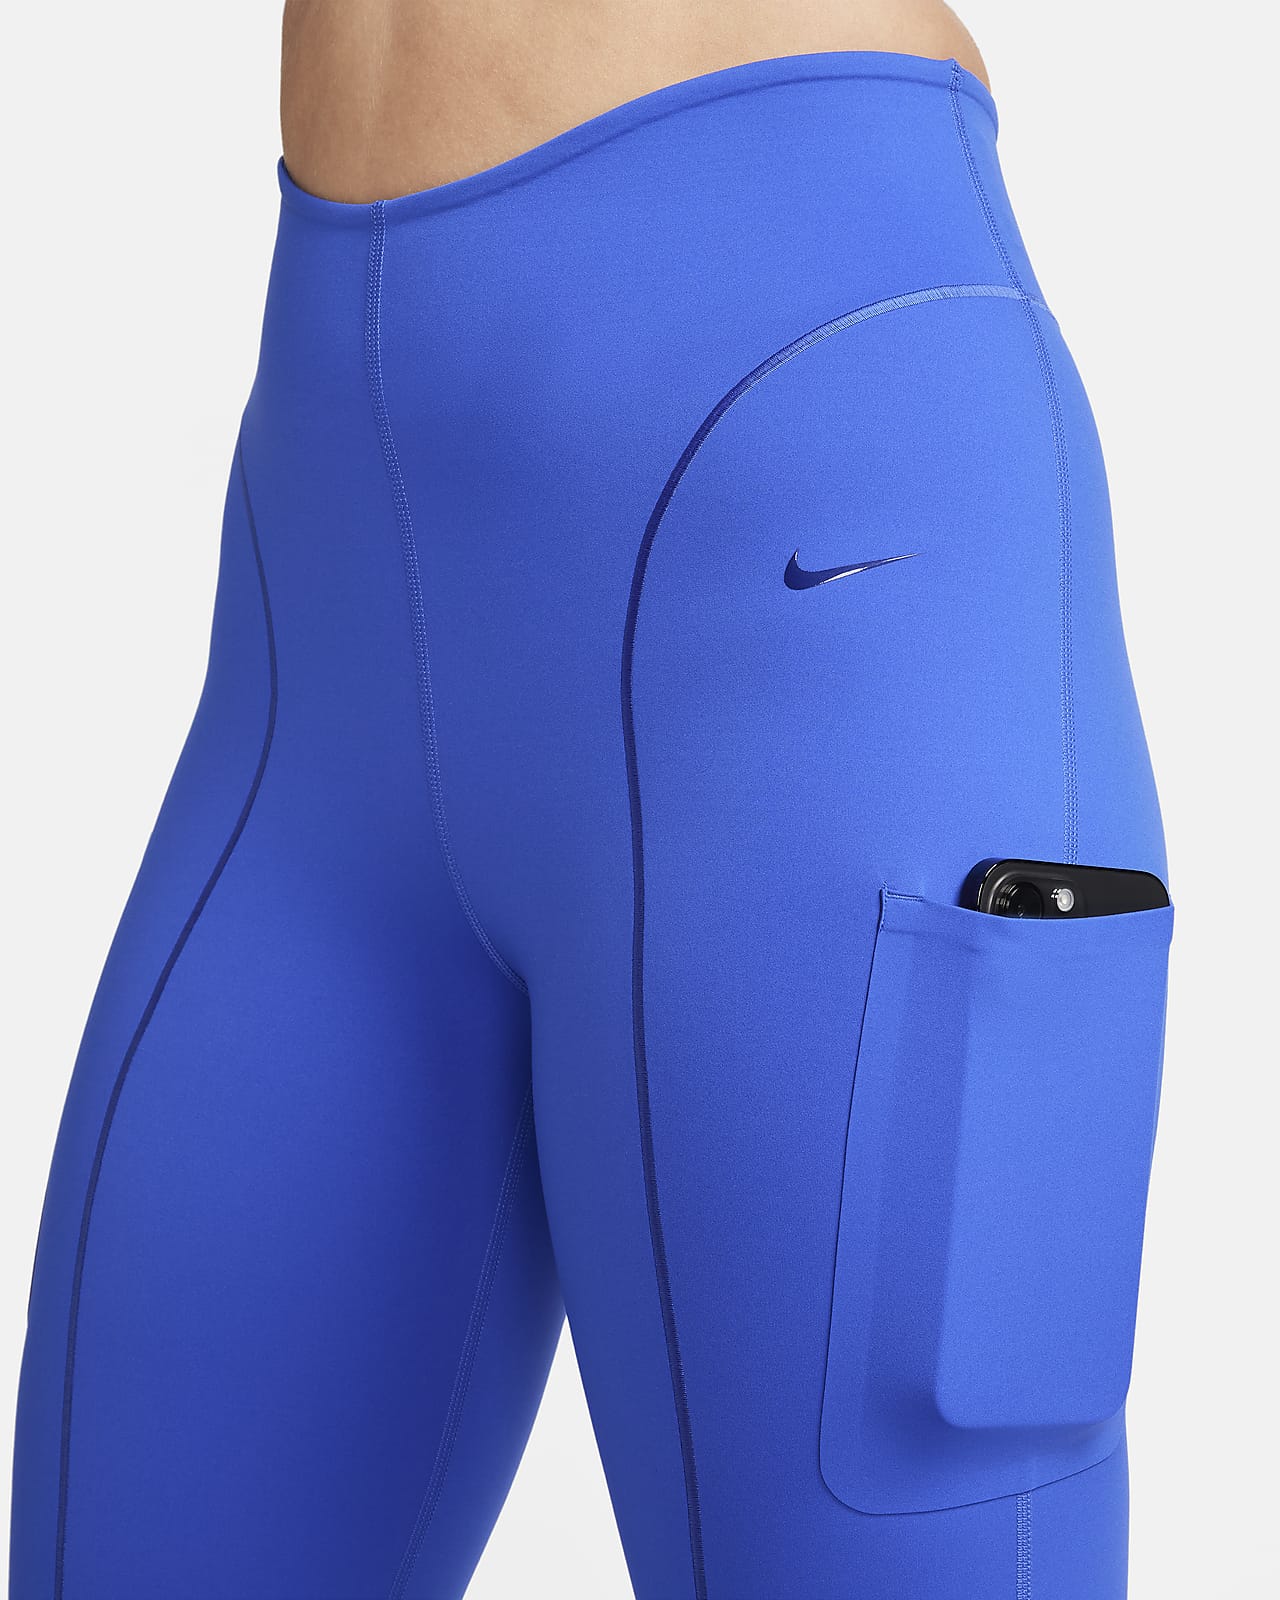 Nike FutureMove Women's Dri-FIT High-Waisted Pants with Pockets.